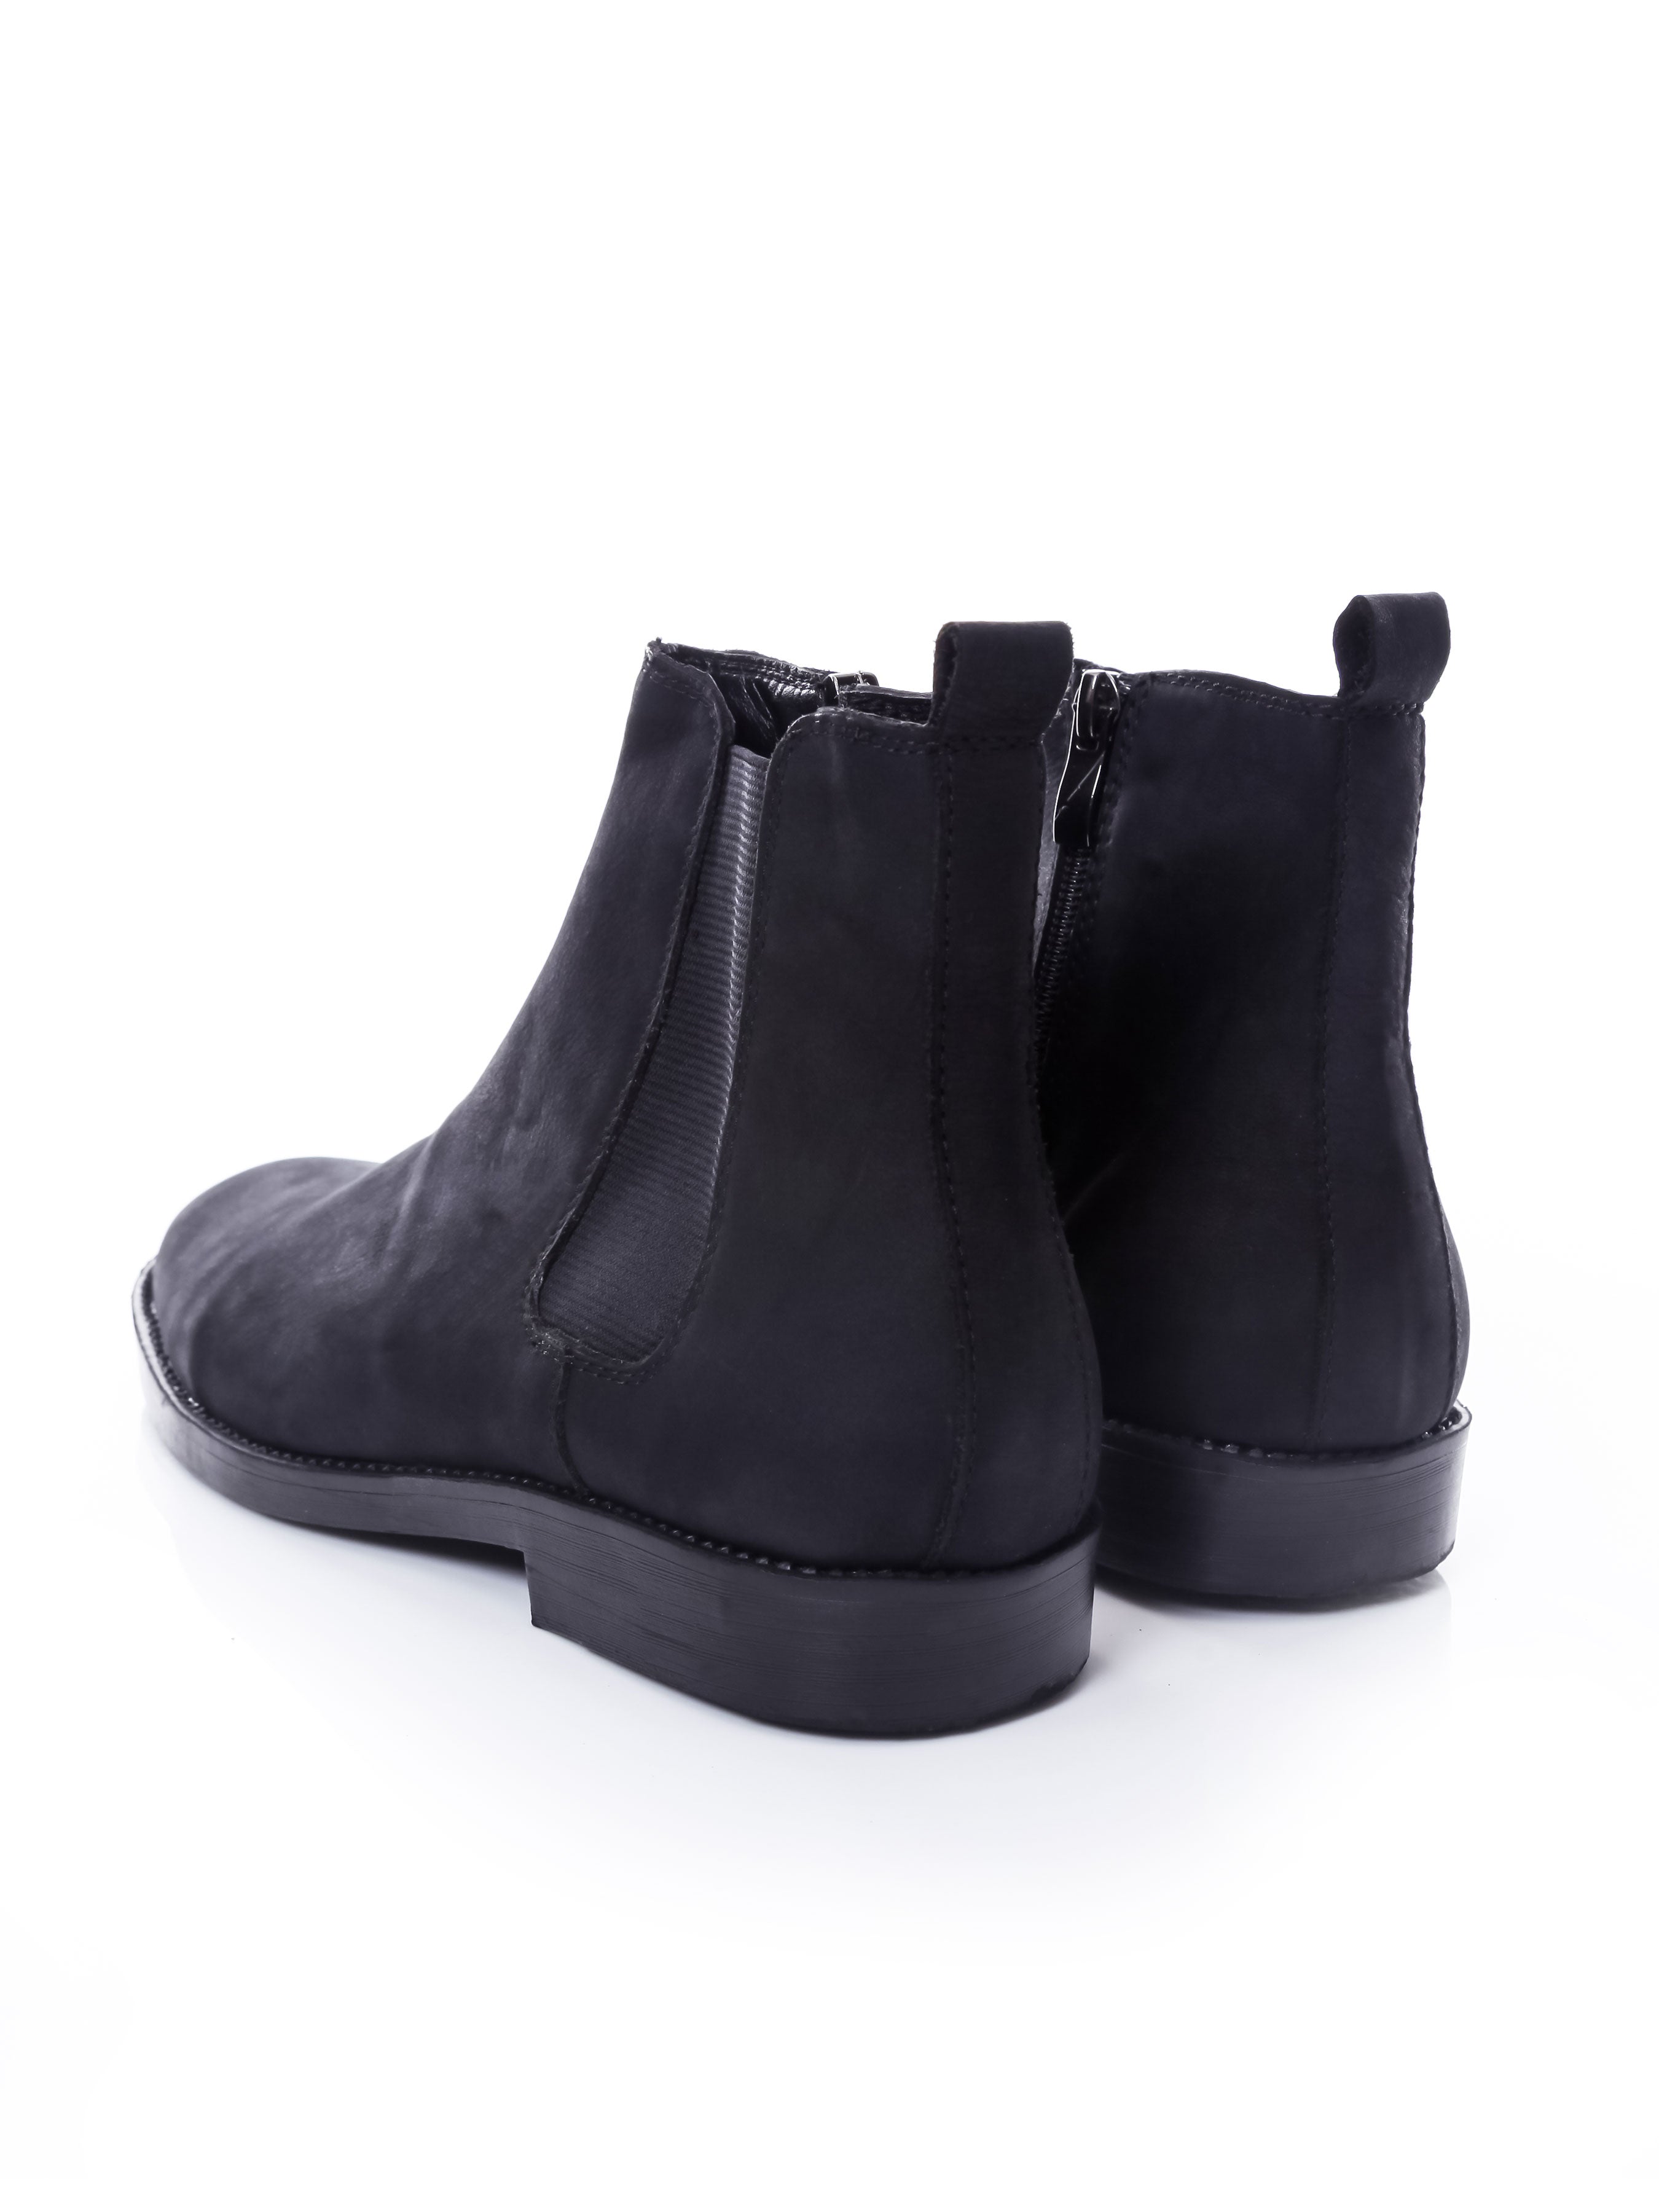 Chelsea Boots With Zipper - Black Nubuck Leather (Crepe Sole) - Zeve Shoes